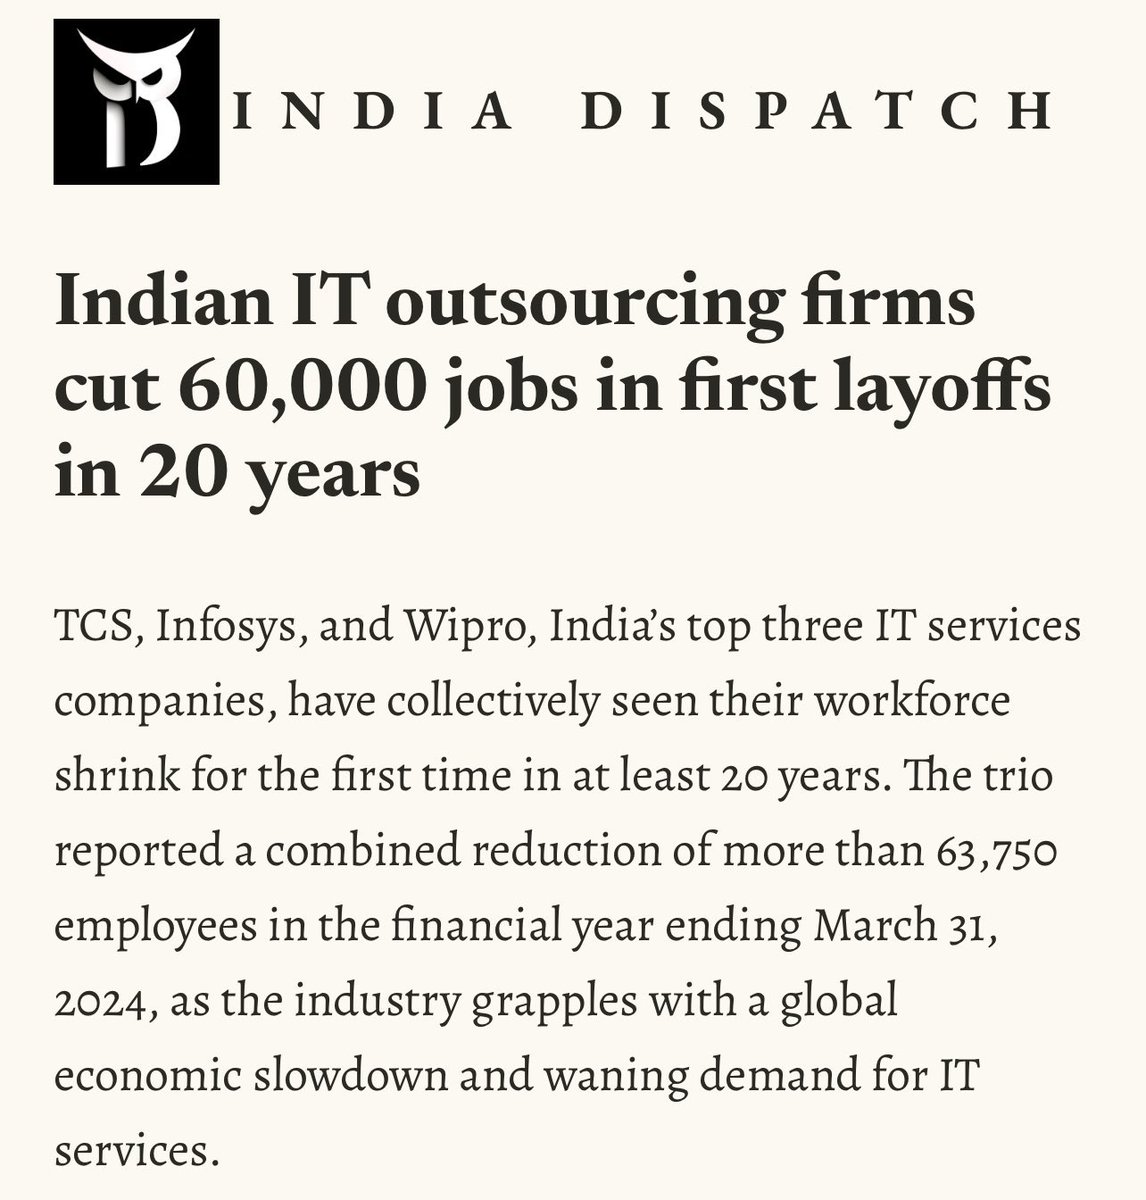 WITCH(wipro, infosys, TCS, cognizant, HCL) companies are still the number 1 employer of tech talent in India.

Big MnCs are rather dwarf compared to them when it comes to the number of people employed. 

And when these companies start laying off, you know the future is not